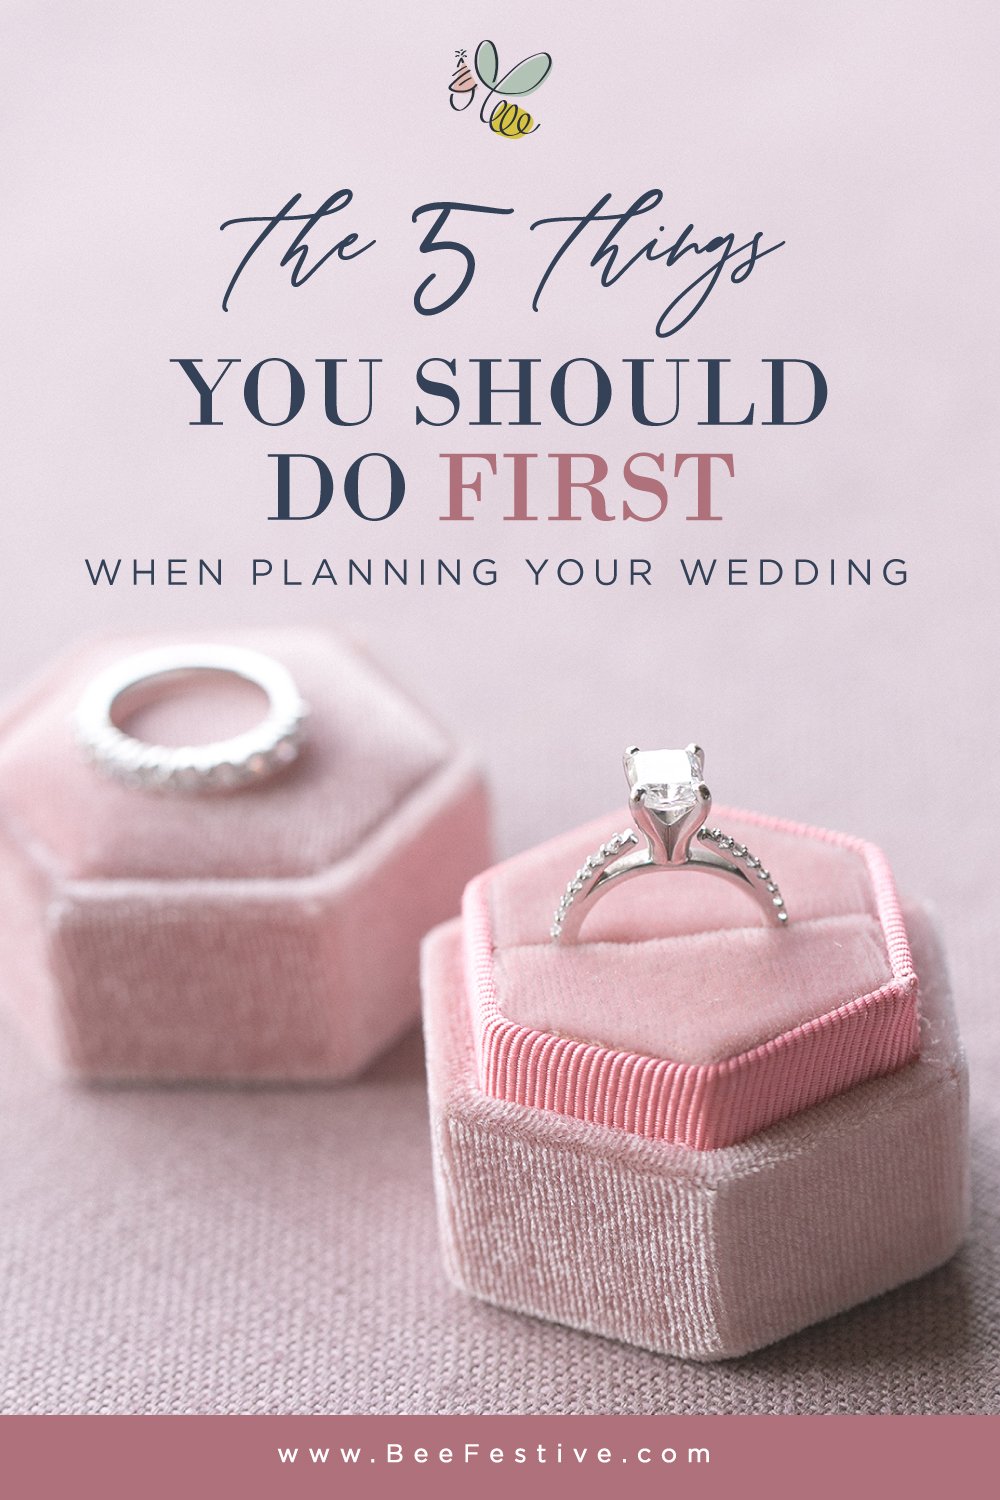 Bee-Festive-5-Things-You-Should-Do-First-When-Planning-Your-Wedding-Pinterest-Graphic-Engagement-Ring-001.jpg